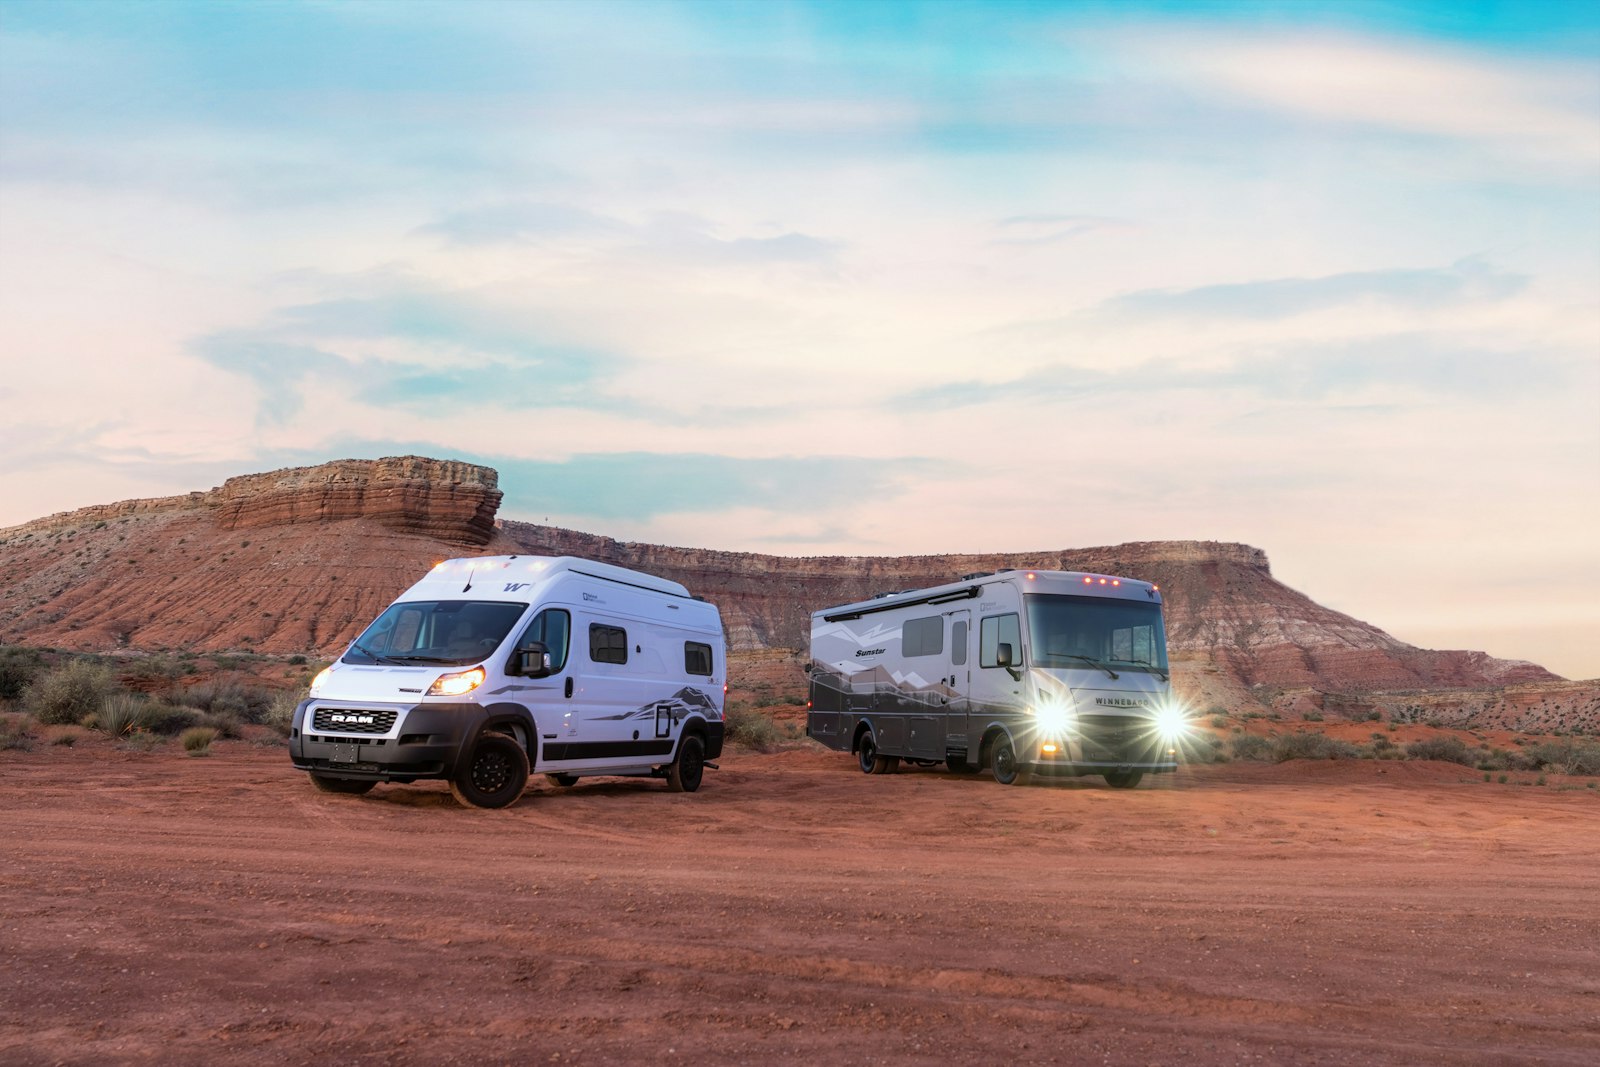 Two RVs are parked, with their lights on, in a desert landscape.